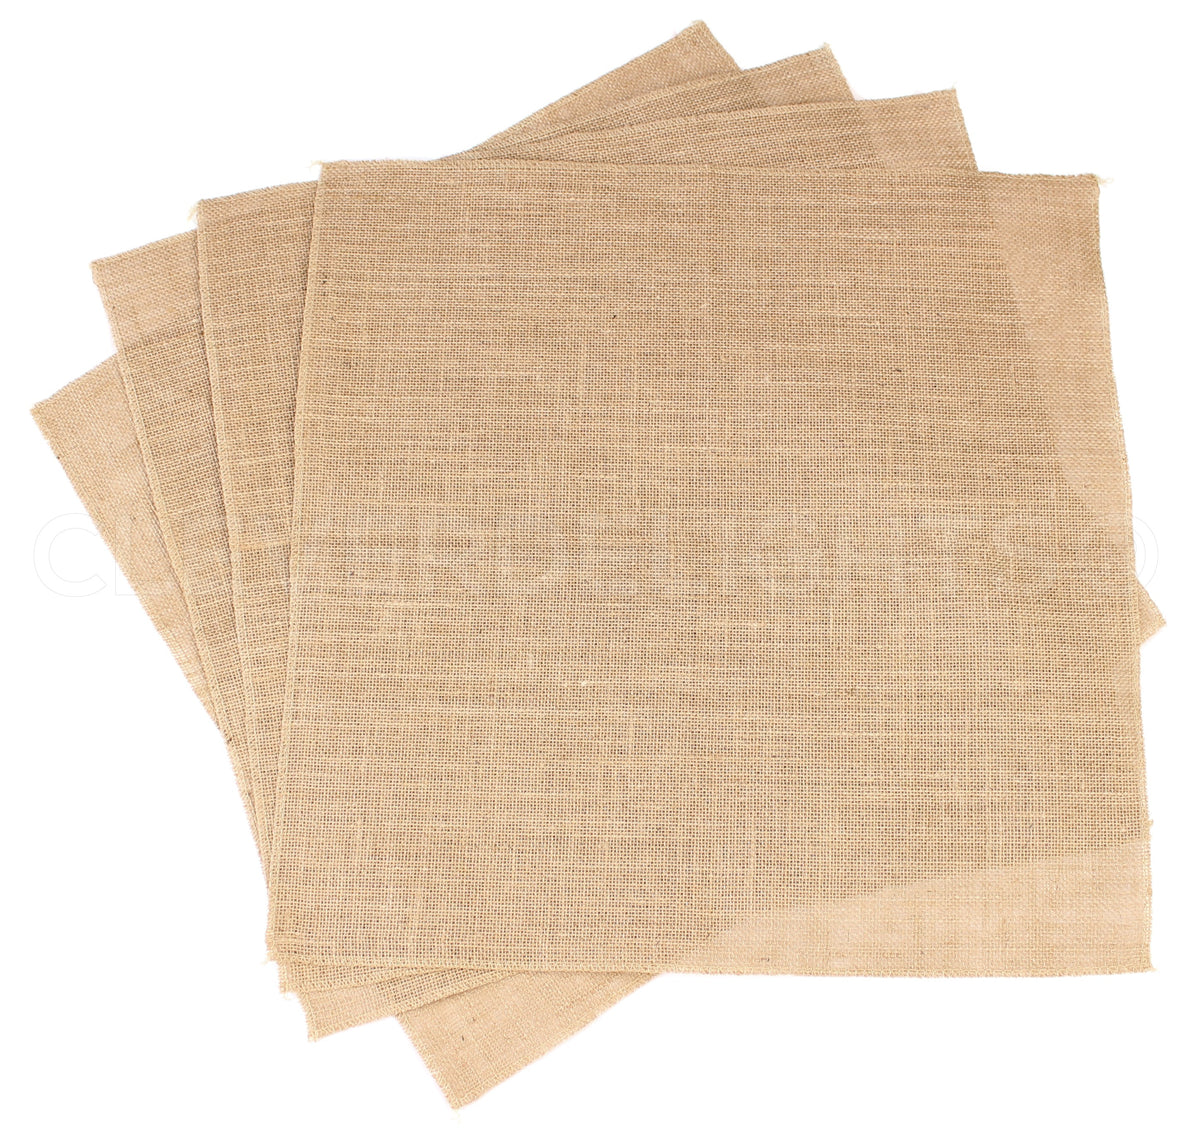 CleverDelights Burlap Tablecloths - 60 x 60 - Finished Edge